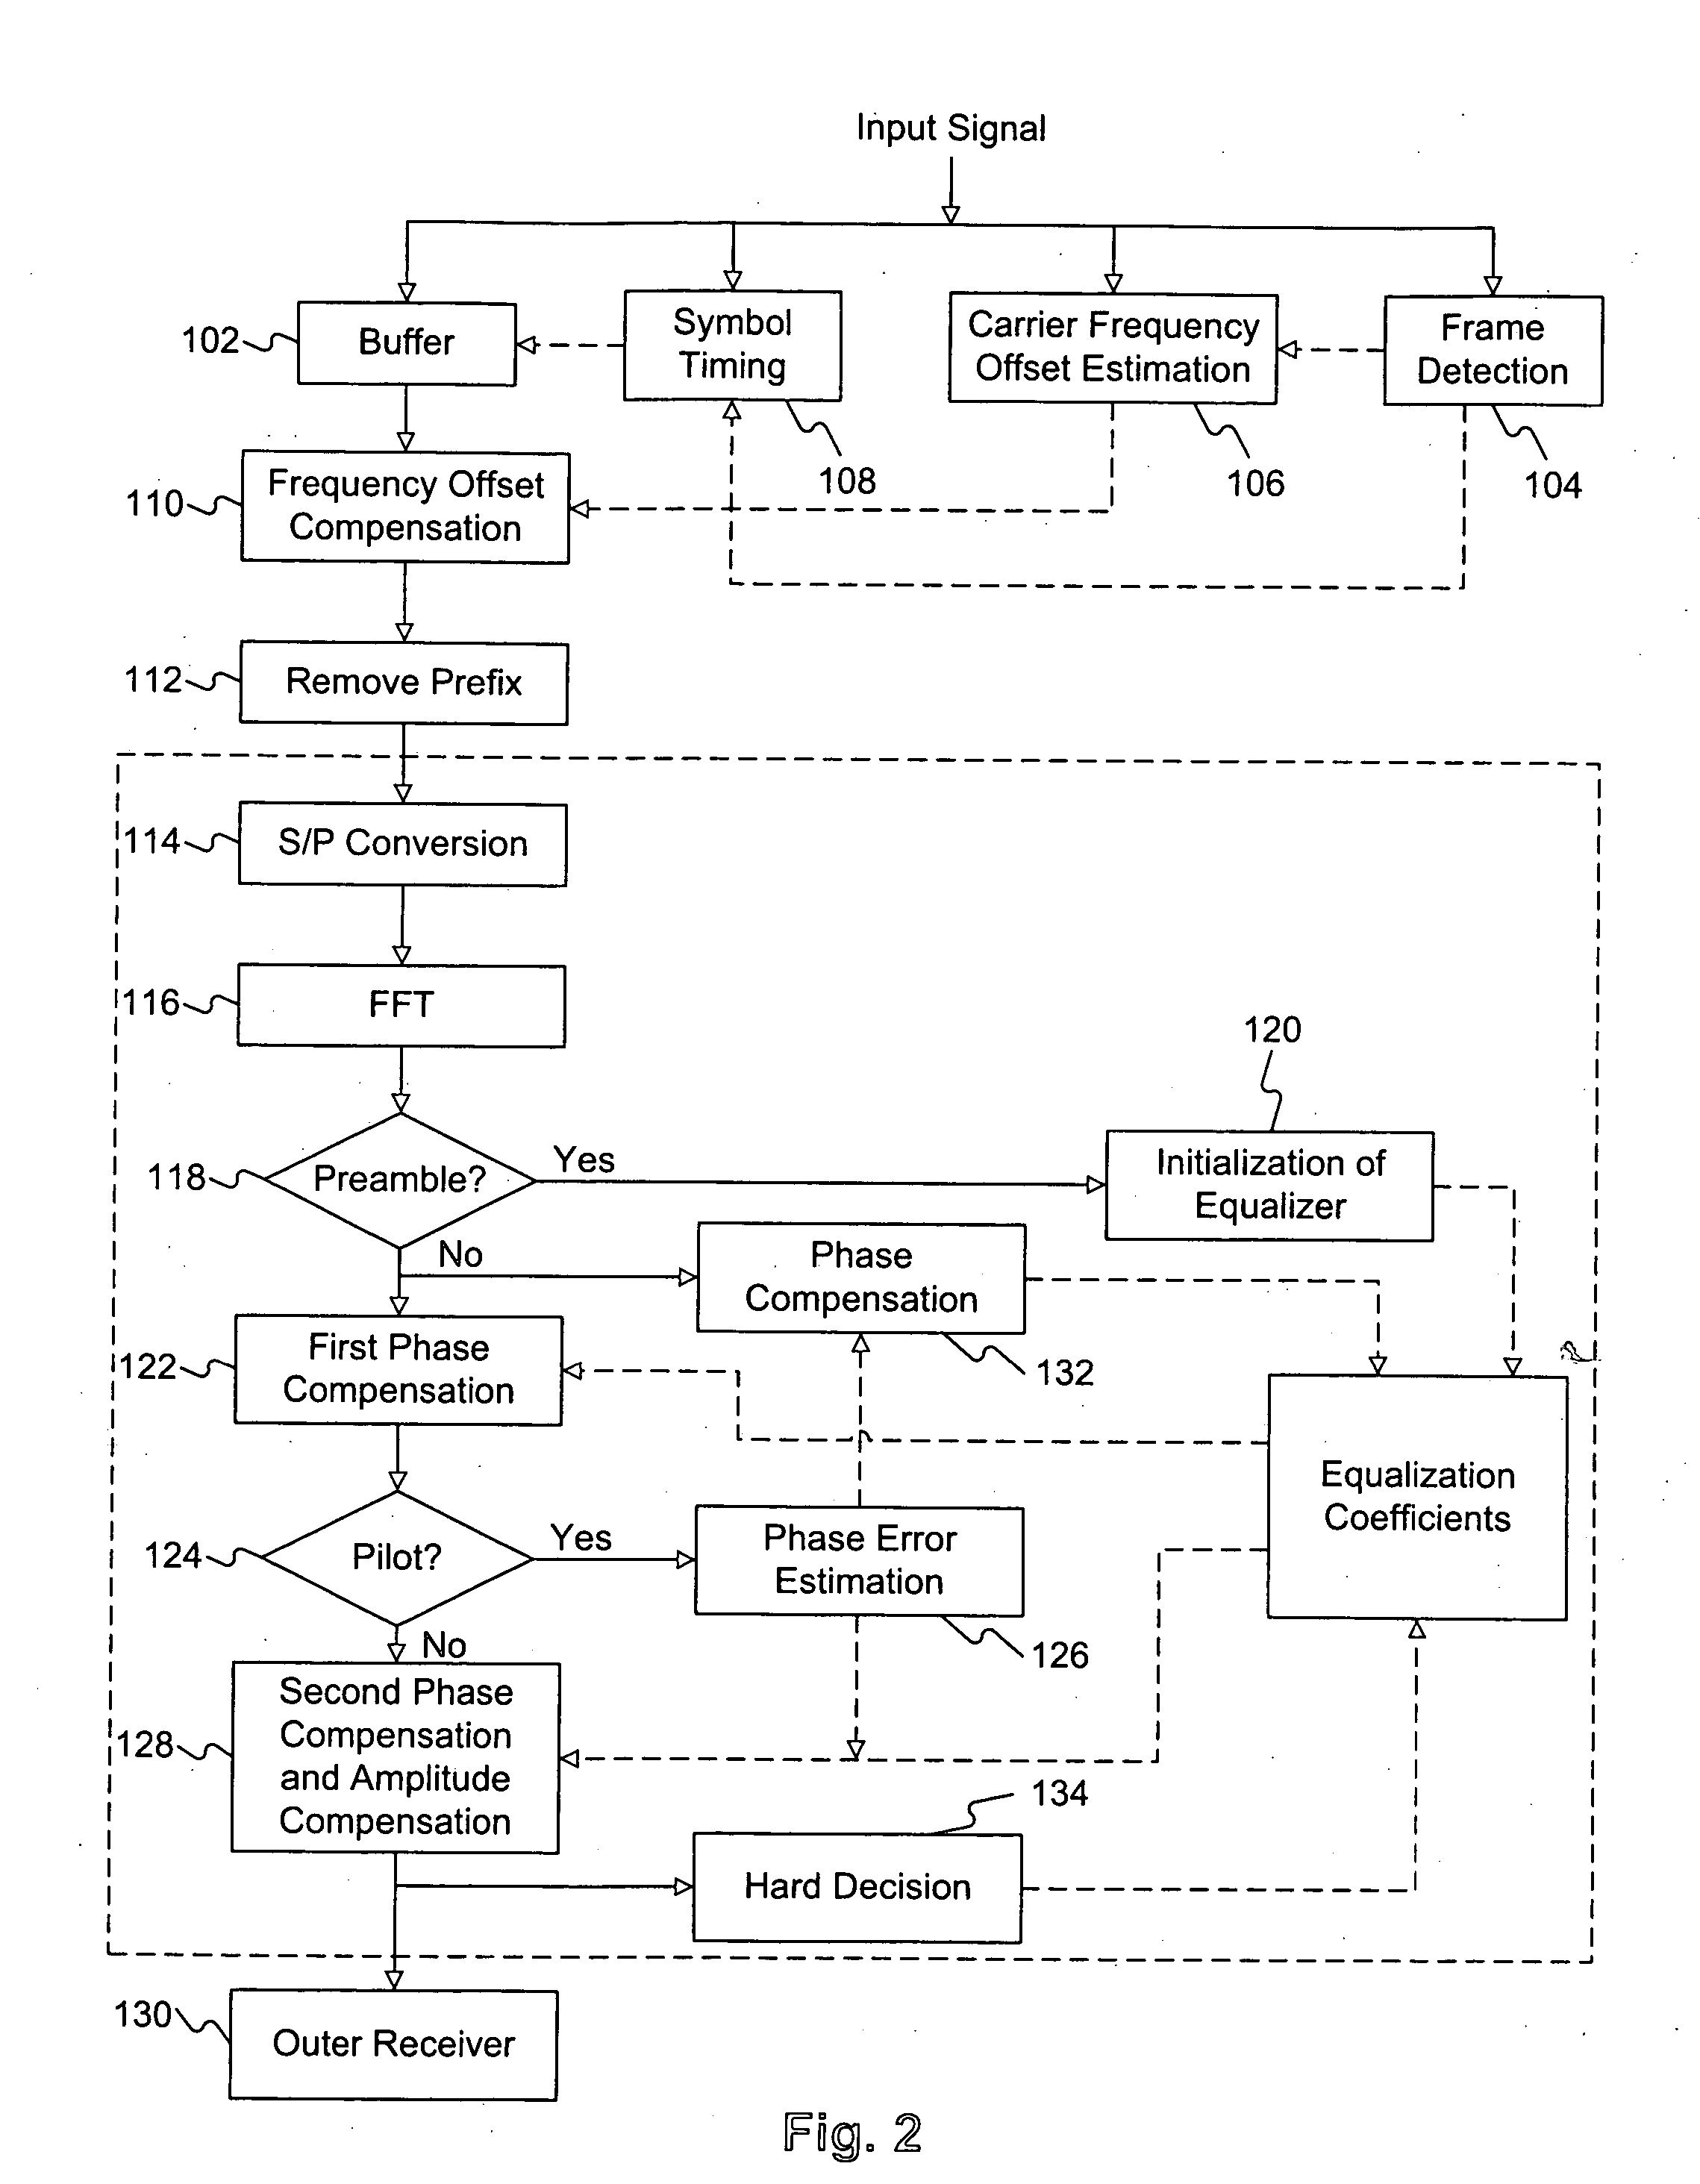 Method of equalization in an OFDM system